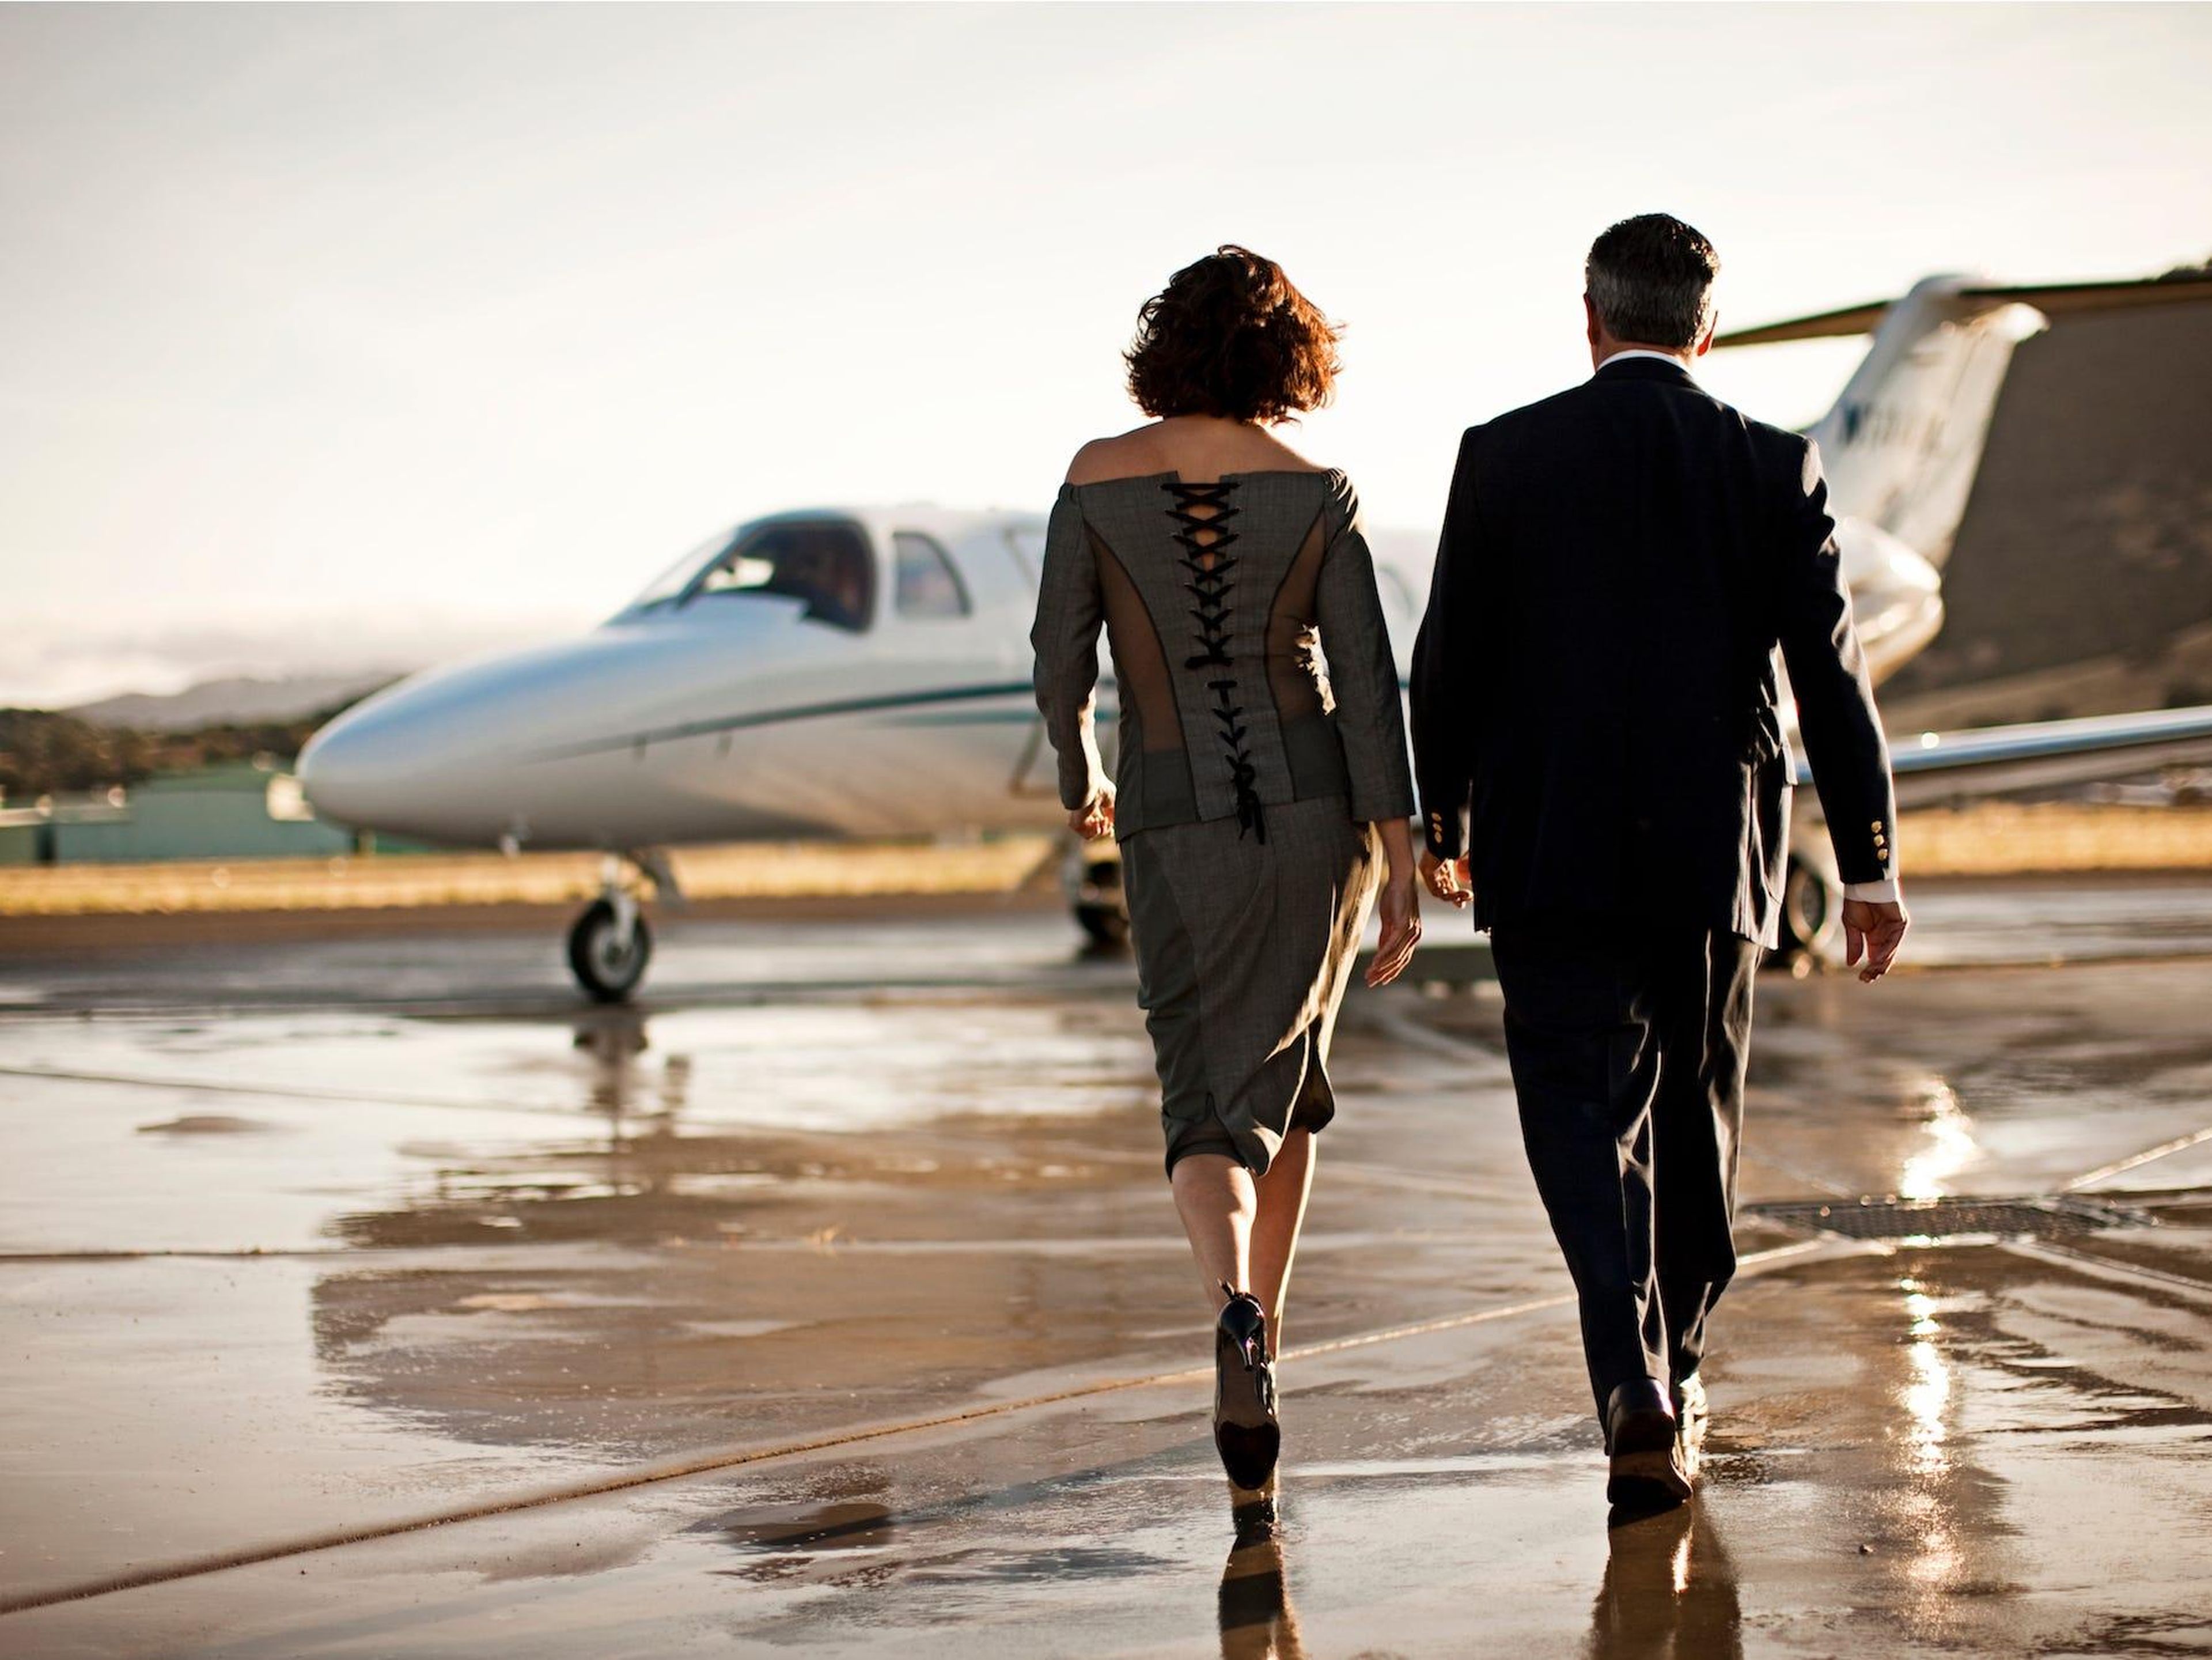 While commercial airlines suffer, the private jet business is booming.